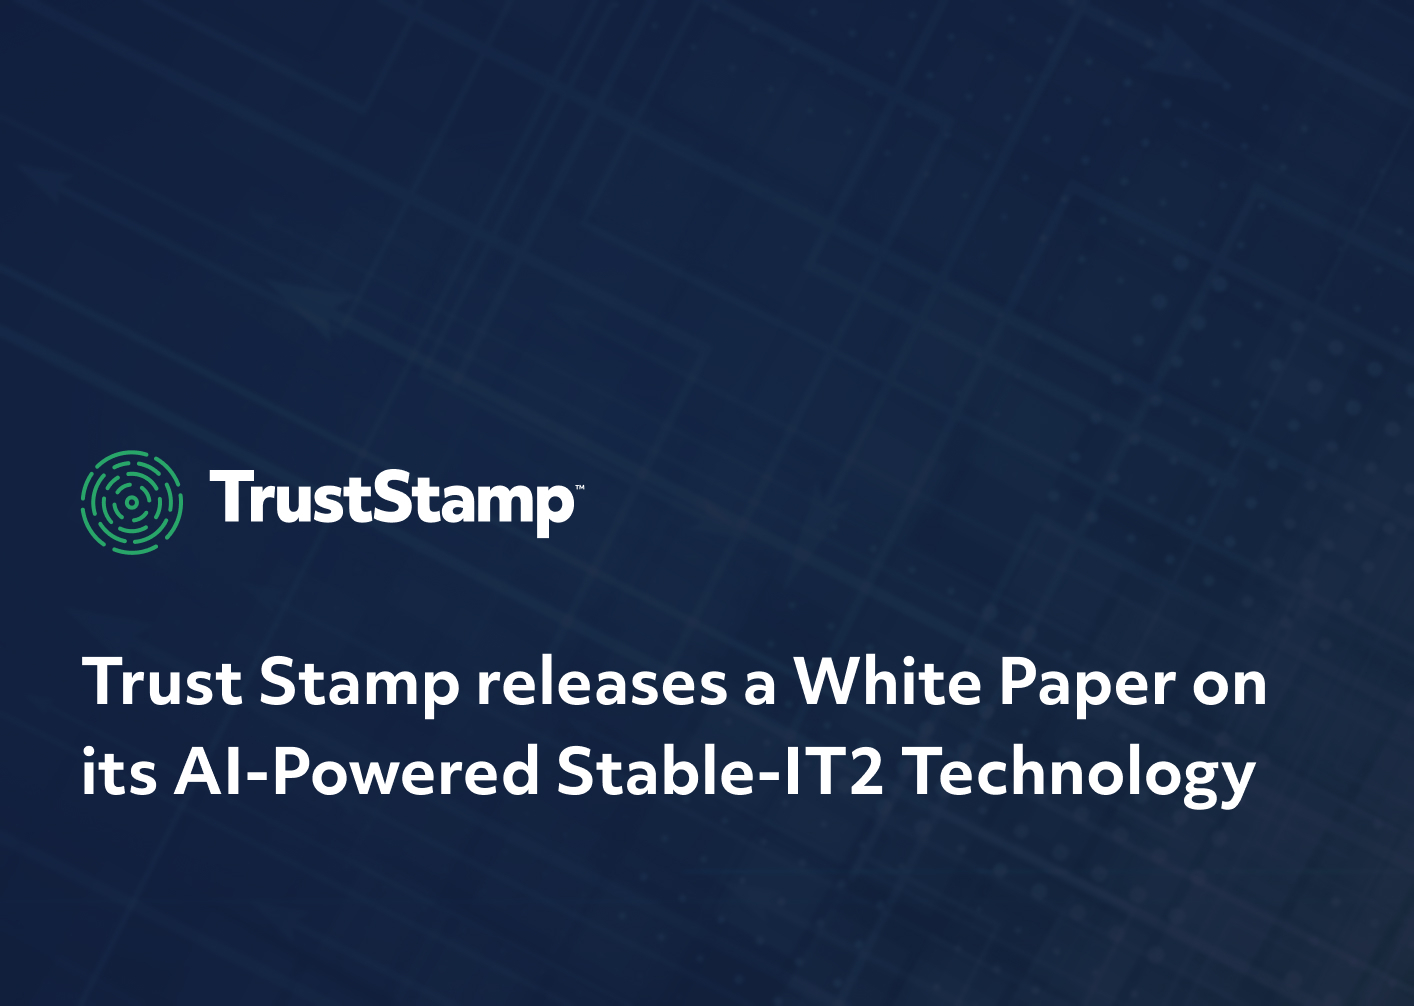 trust-stamp-releases-a-white-paper-on-its-ai-powered-stable-it2-technology